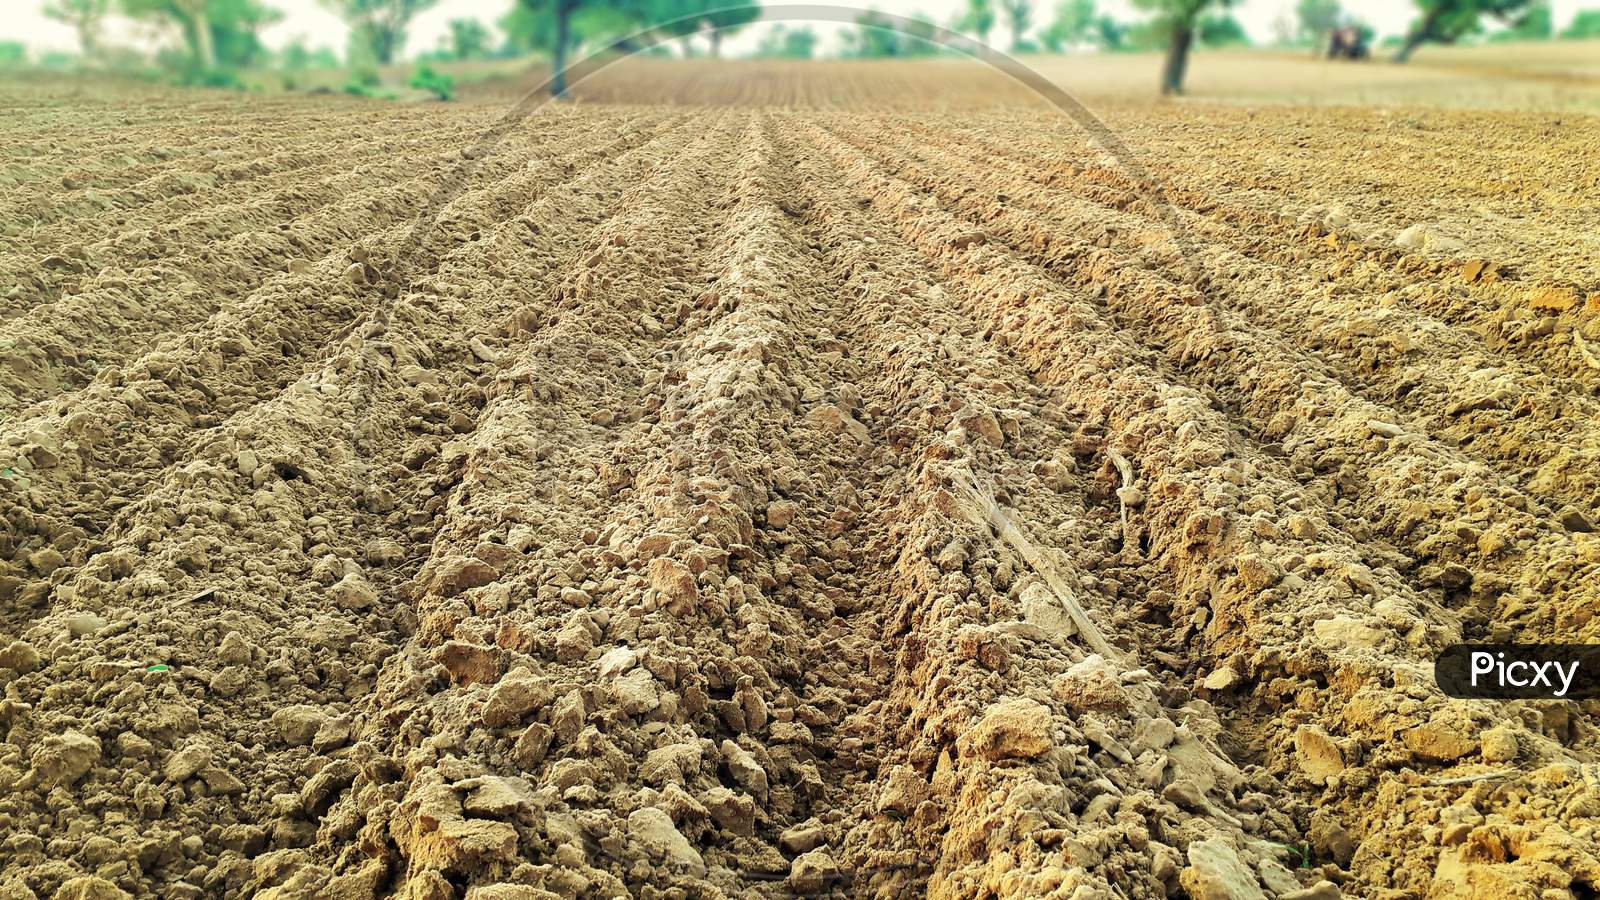 Cultivated Or Plowed Agriculture Land Of A Field In Dry Areas Of India